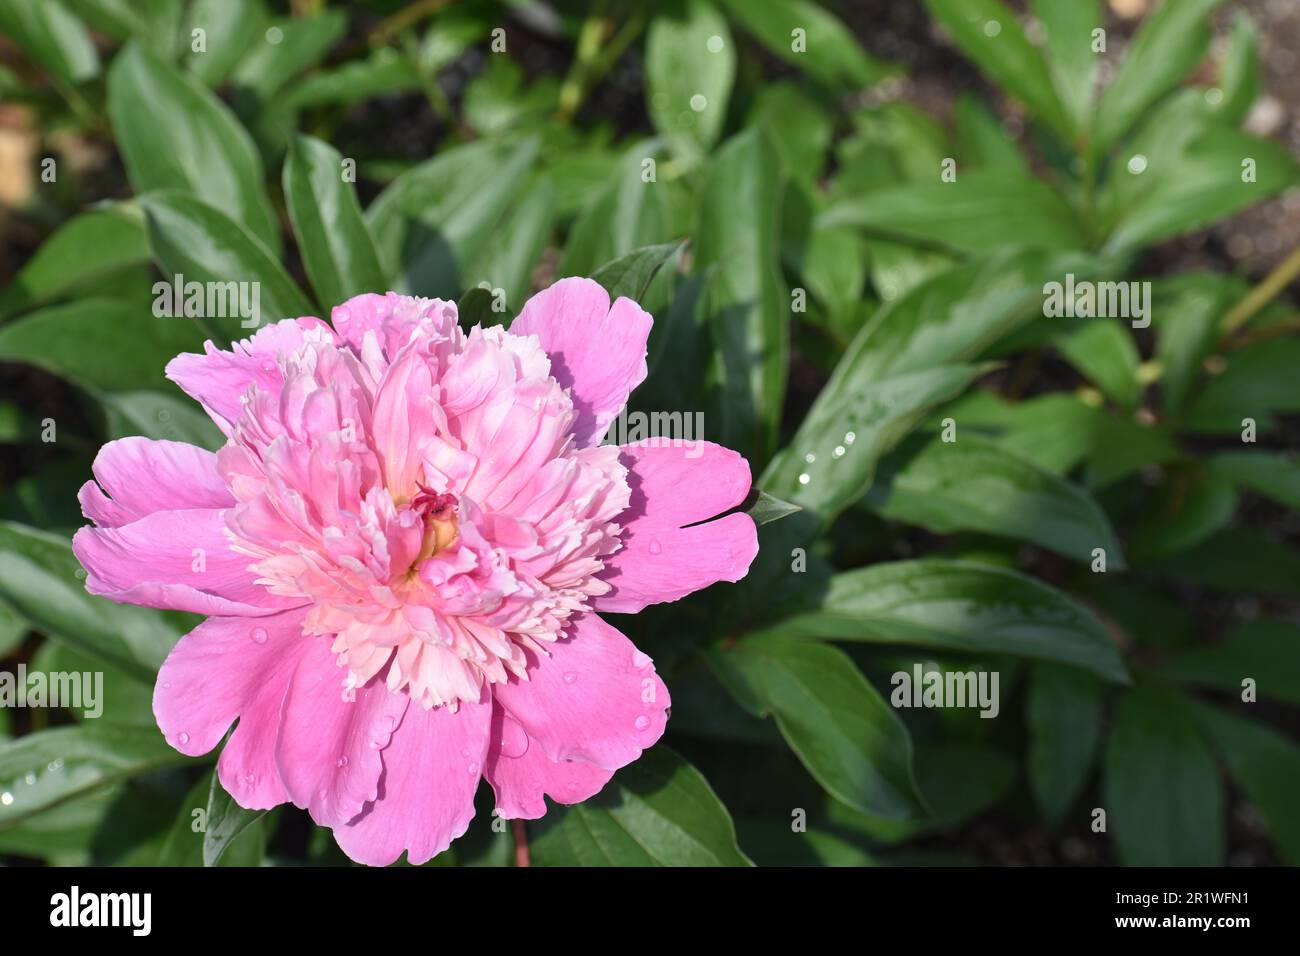 A pink peony, Paeonia officinalis, with fully opened flowers. Stock Photo